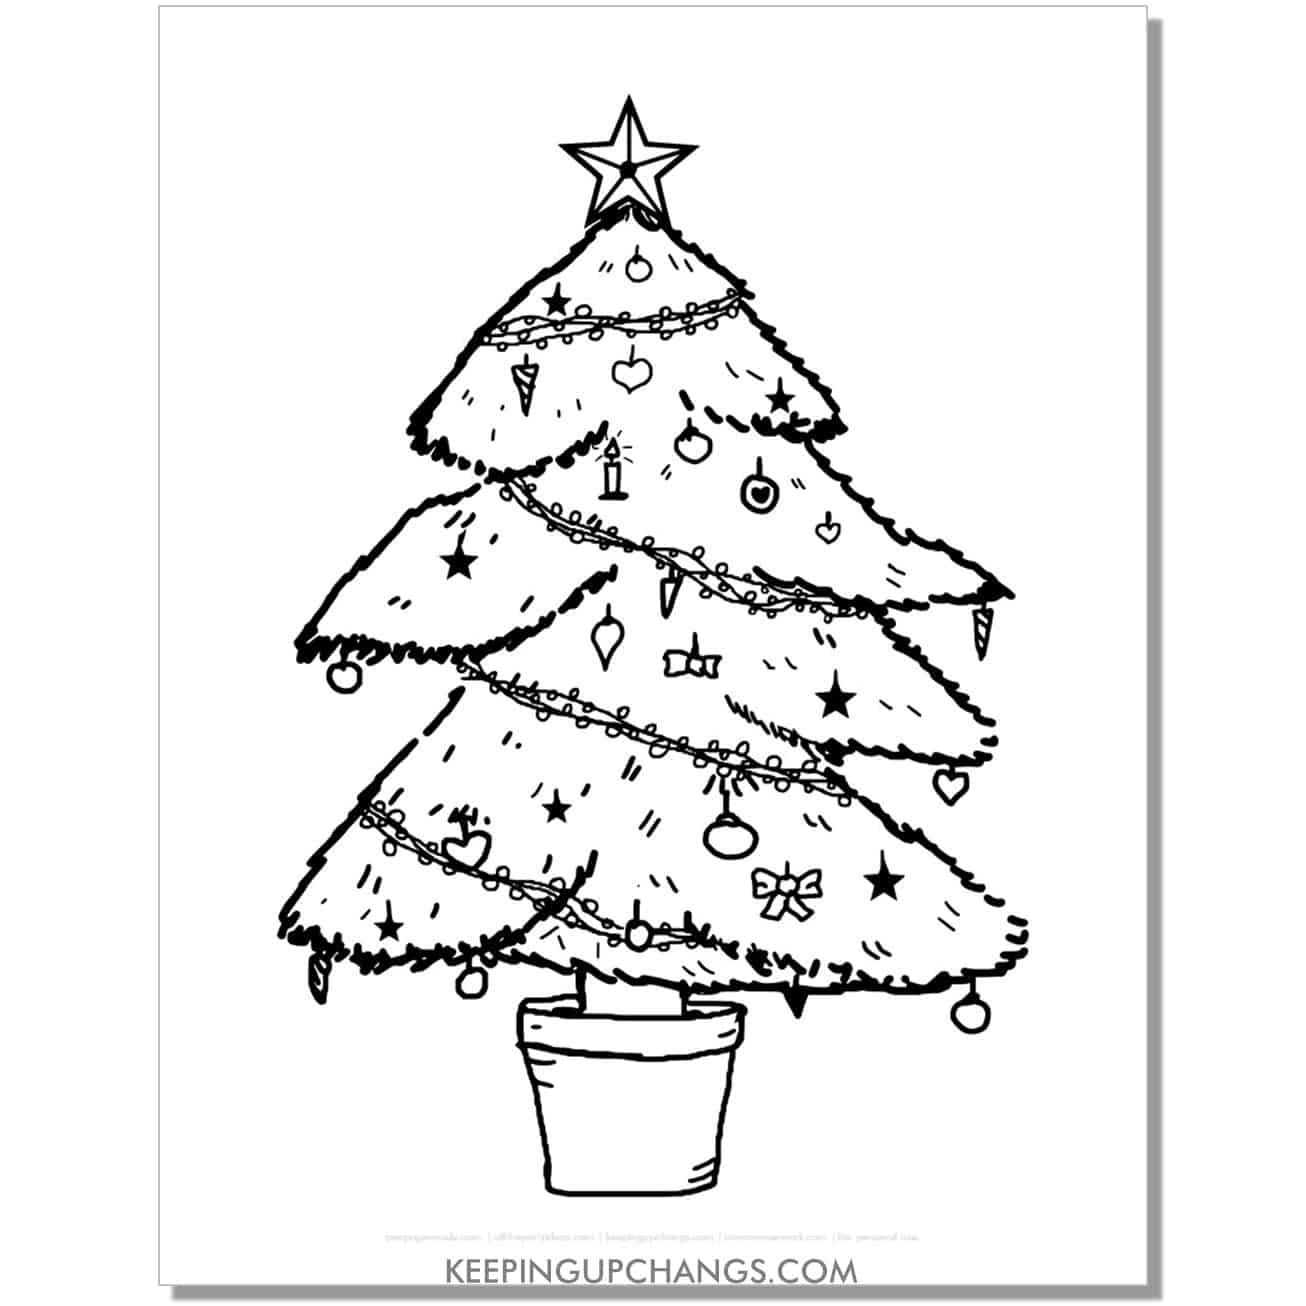 free freehand christmas tree coloring page.